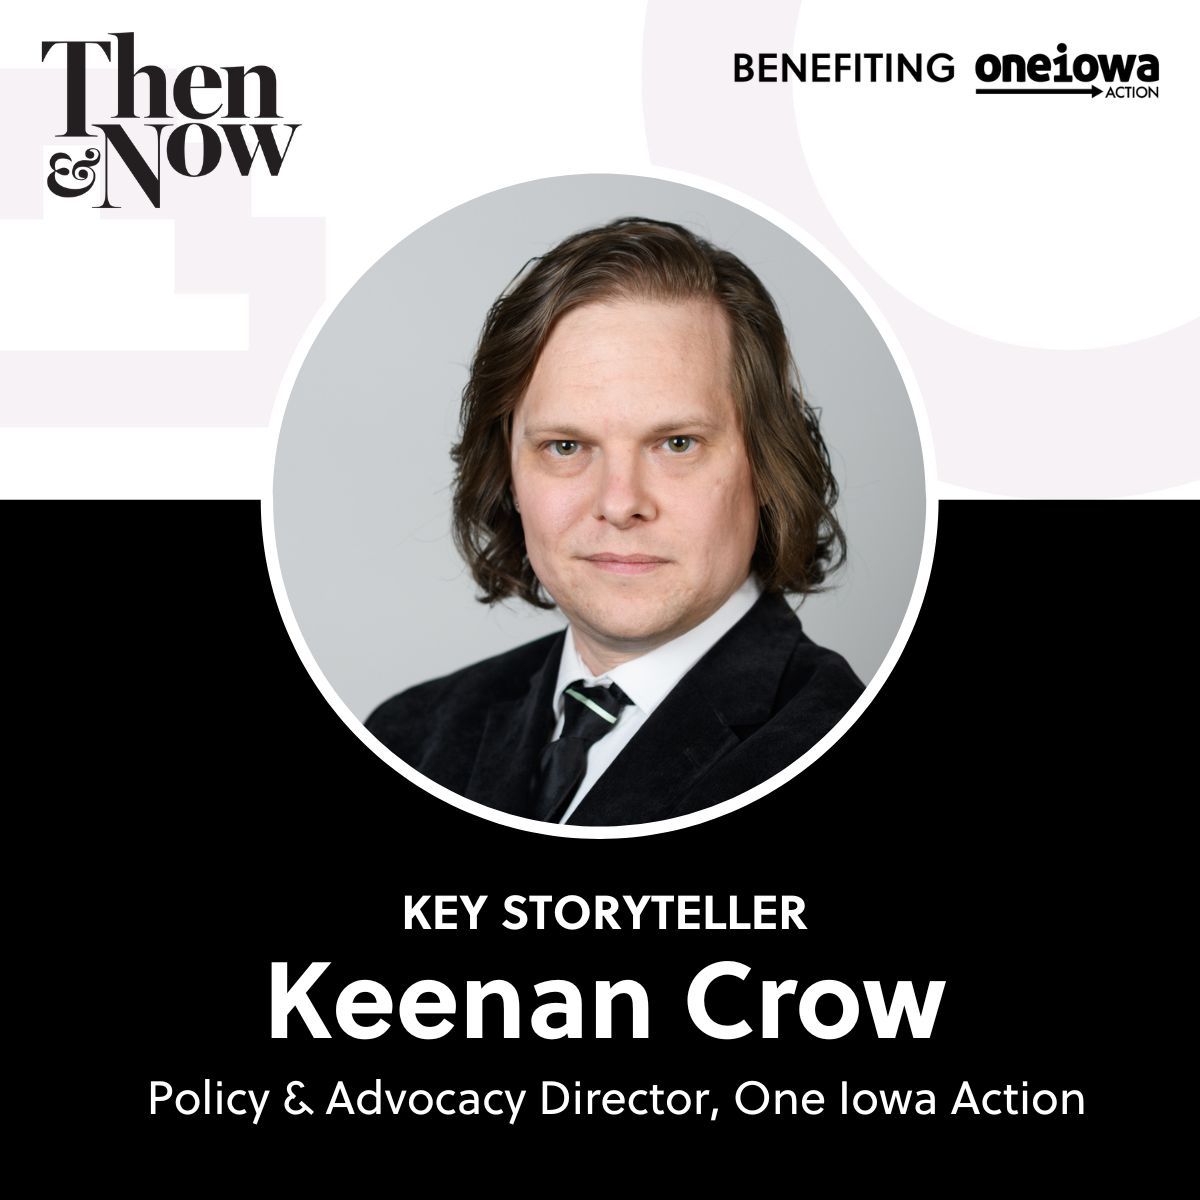 Nobody knows the state of anti-LGBTQ legislation quite like One Iowa Action's very own, Keenan Crow. Join us to hear directly from Keenan as a keynote storyteller at our inaugural legislative fundraiser on the 15th Anniversary of Marriage Equality in Iowa: buff.ly/3UFzsHe